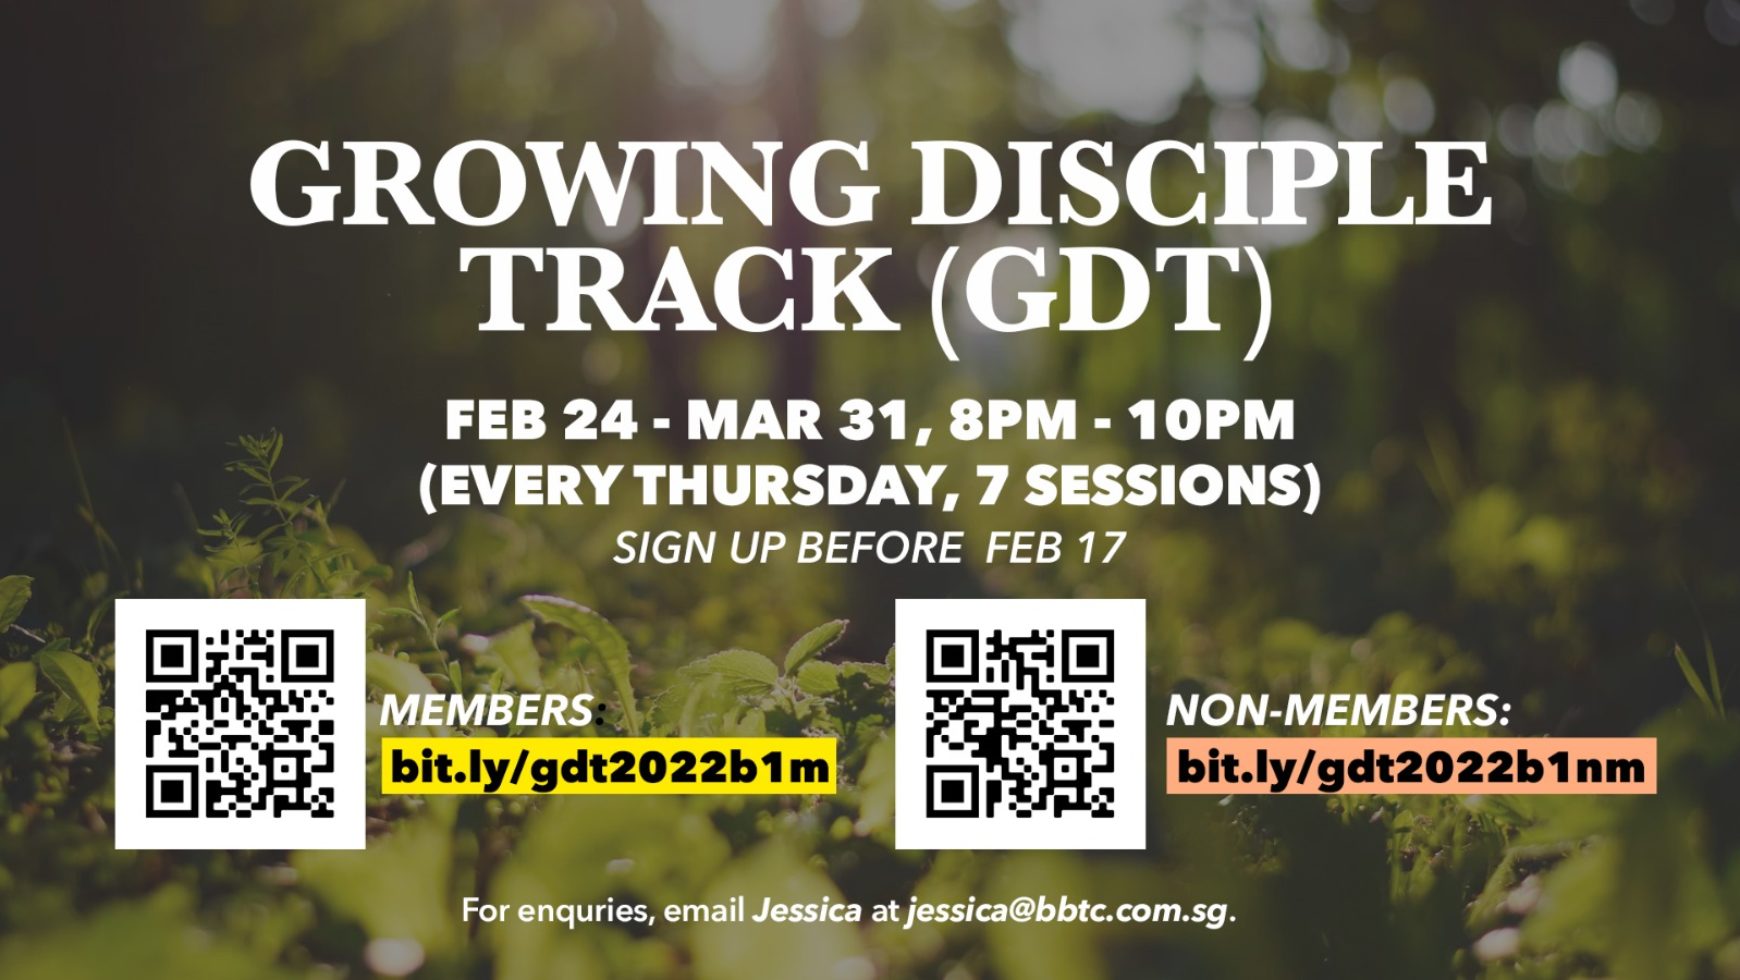 GROWING DISCIPLE TRACK (GDT)